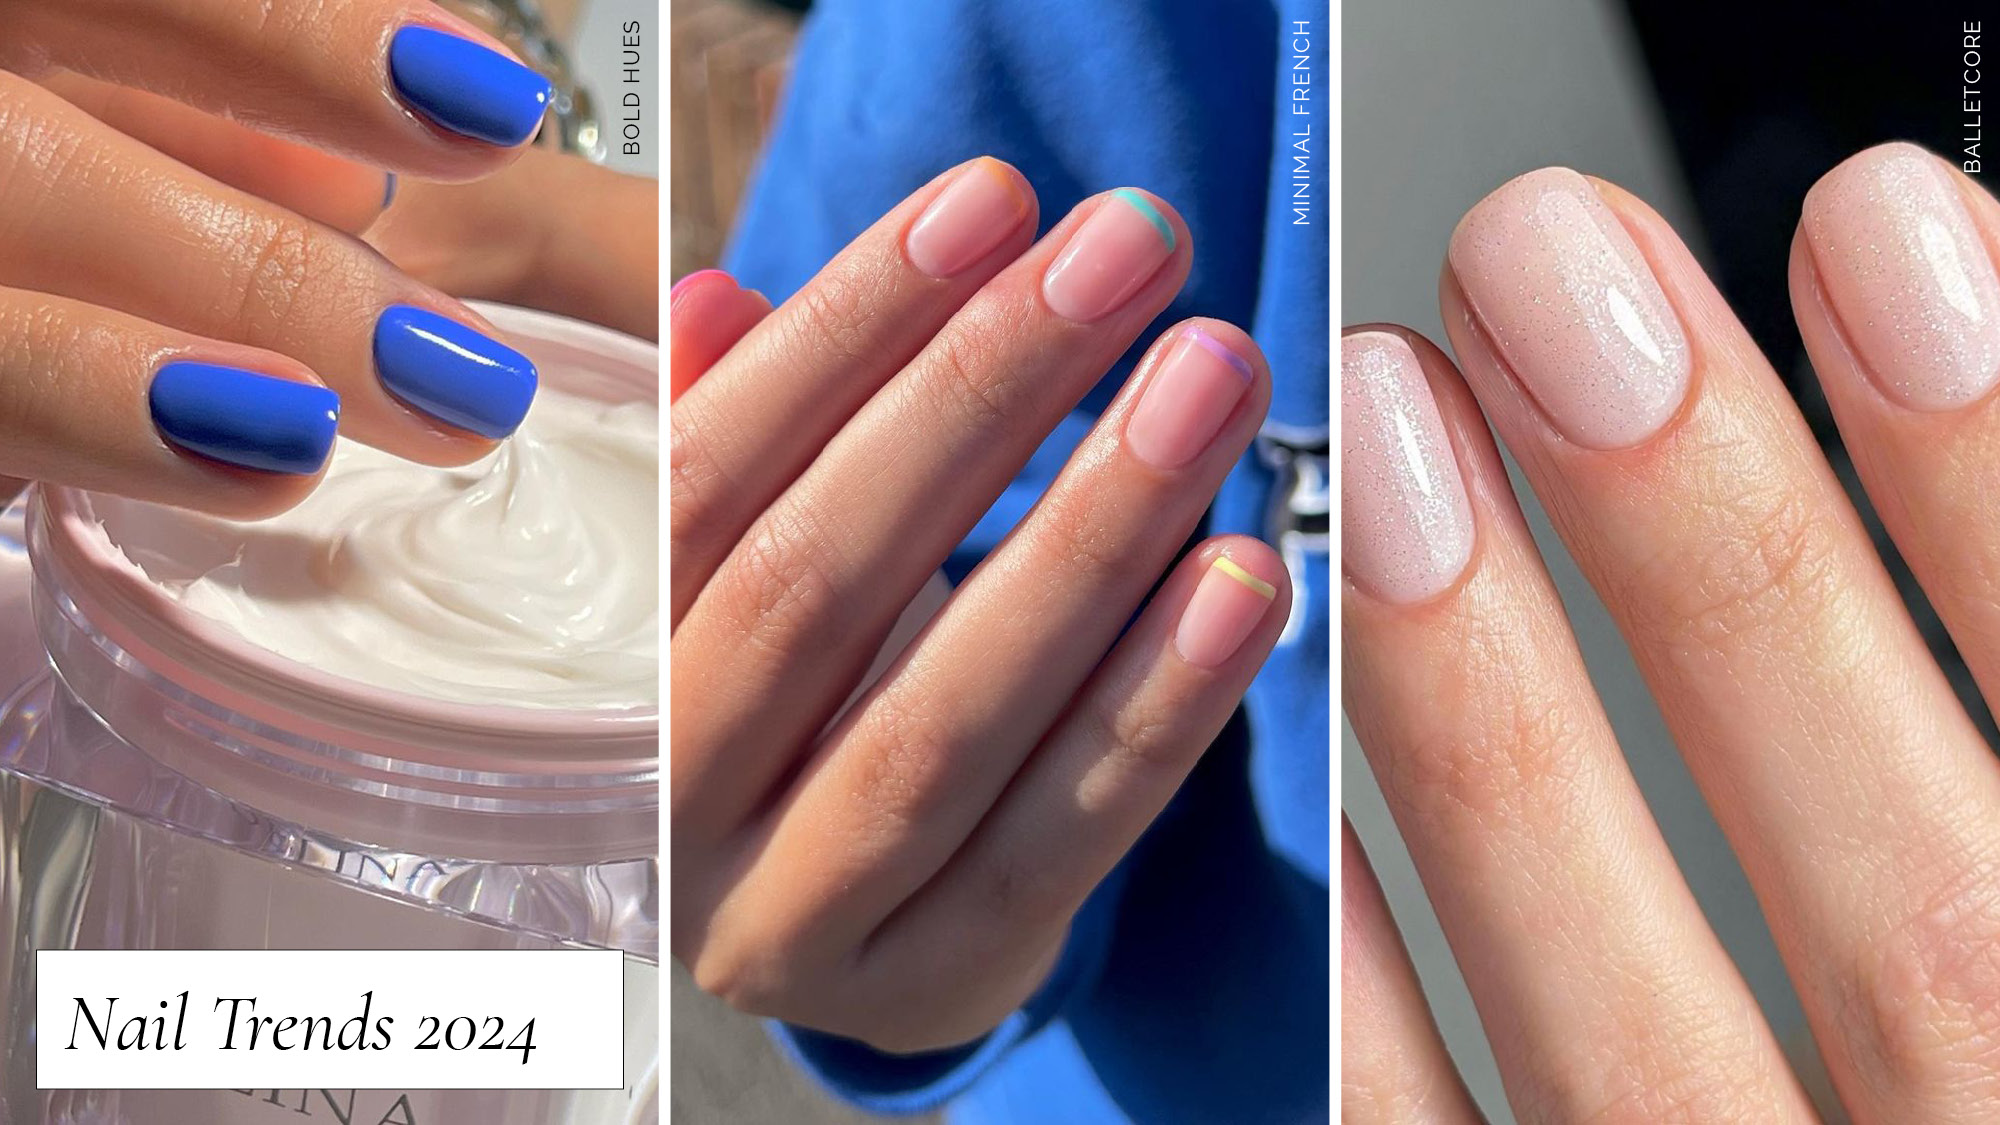 7 Fun & Flirty Nail Trends to Watch for In 2022 - Love Happens Mag